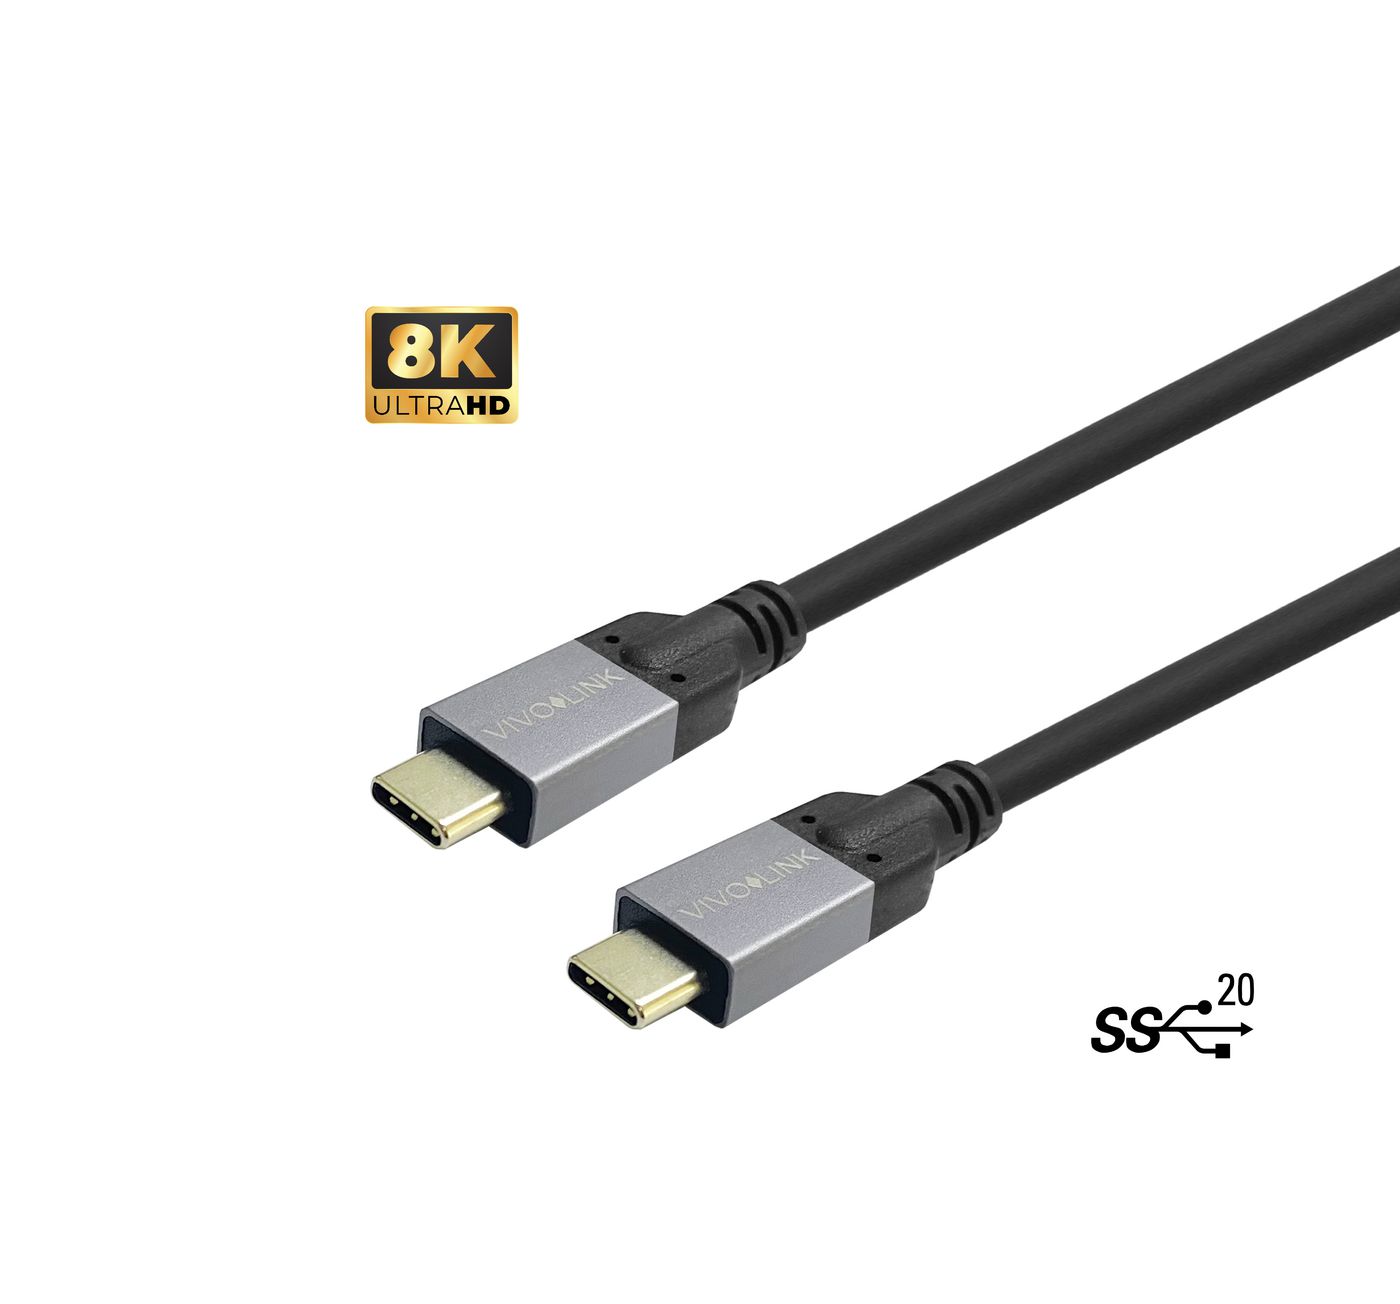 EET USB-C to Cable 2m Supports 20 Gbps data - Kabel - Digital/Daten (PROUSBCMM2)